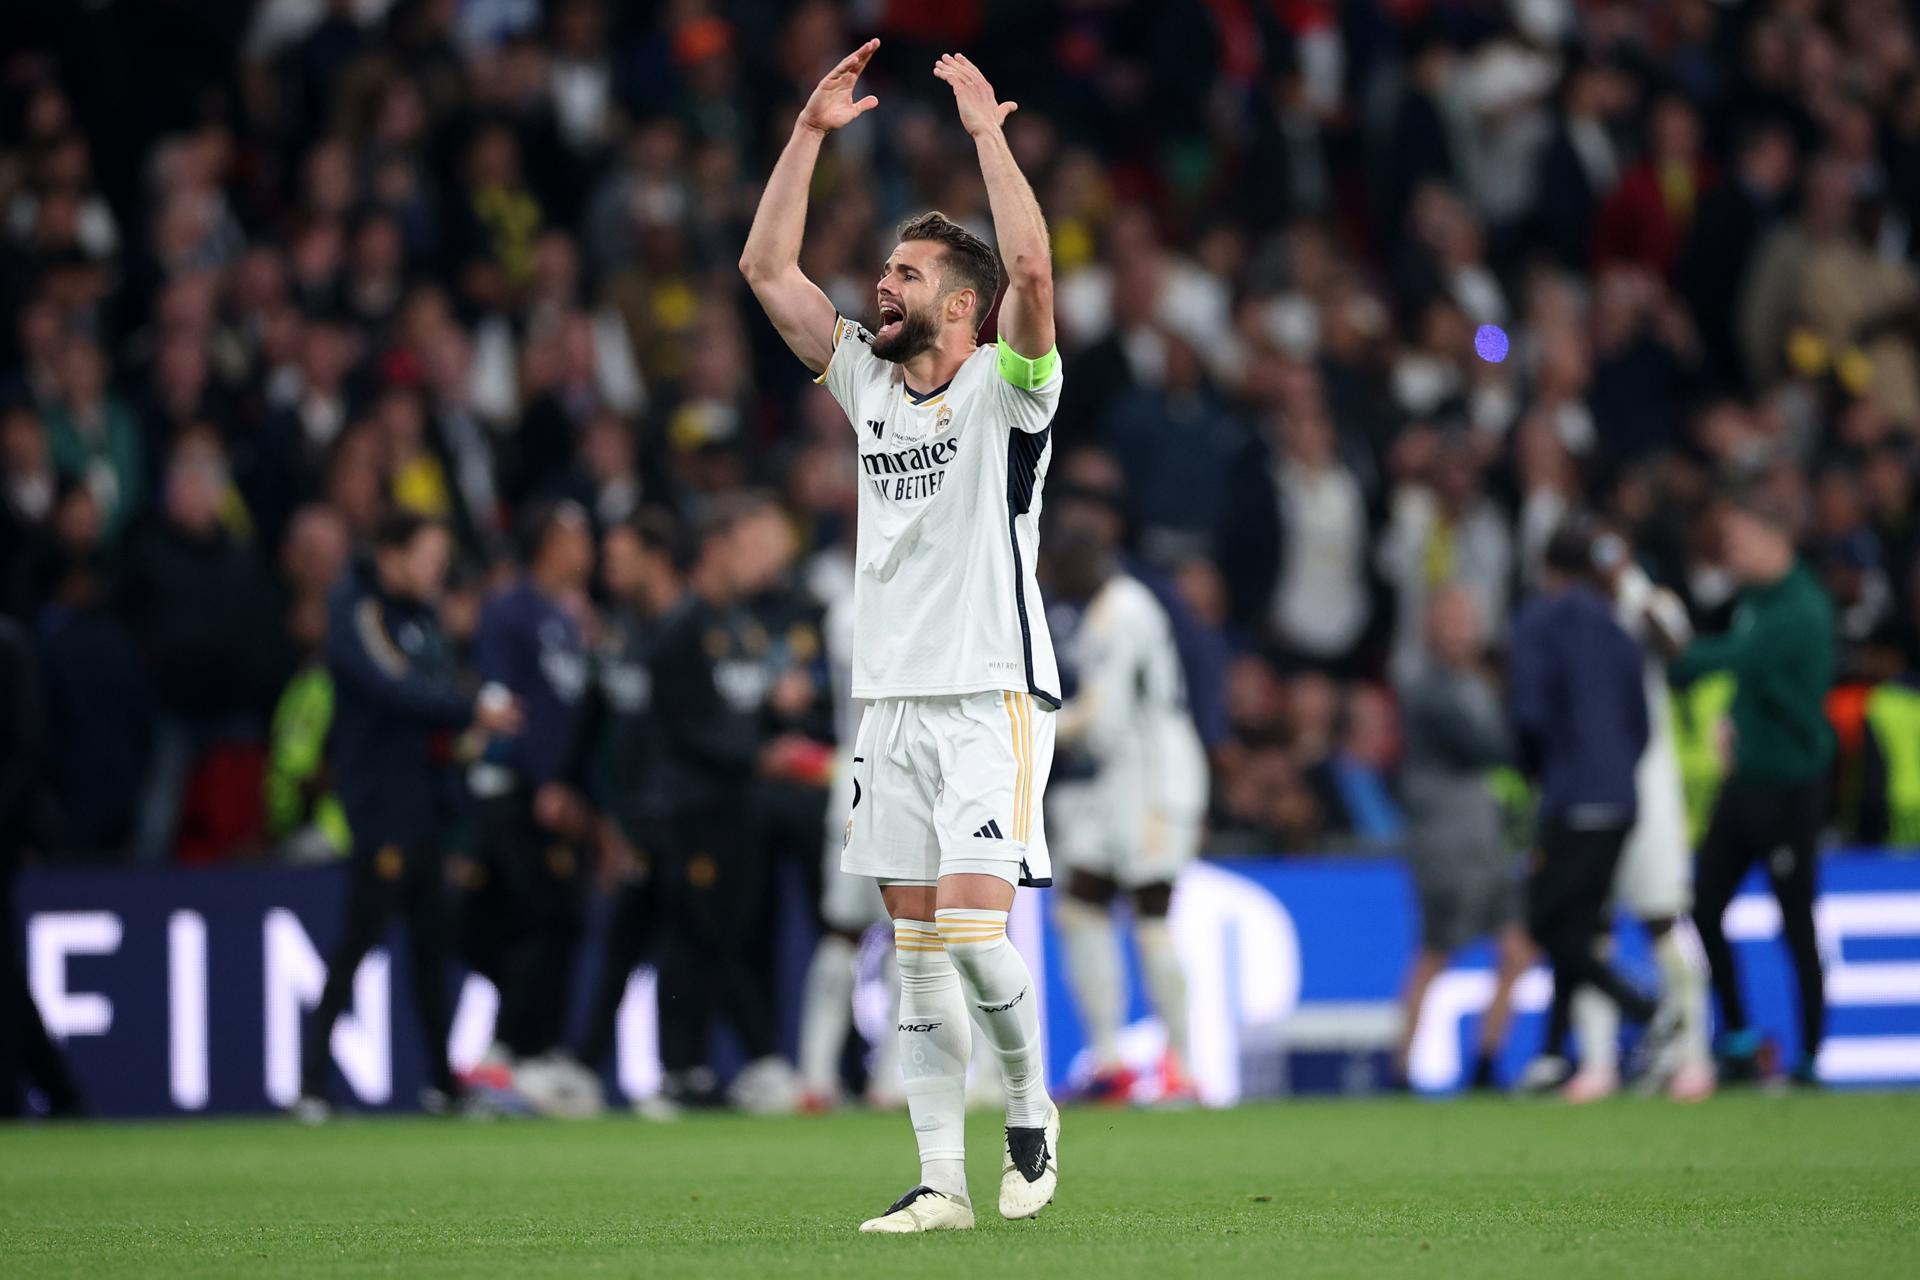 OFFICIAL: Nacho Fernandez bids farewell to Real Madrid